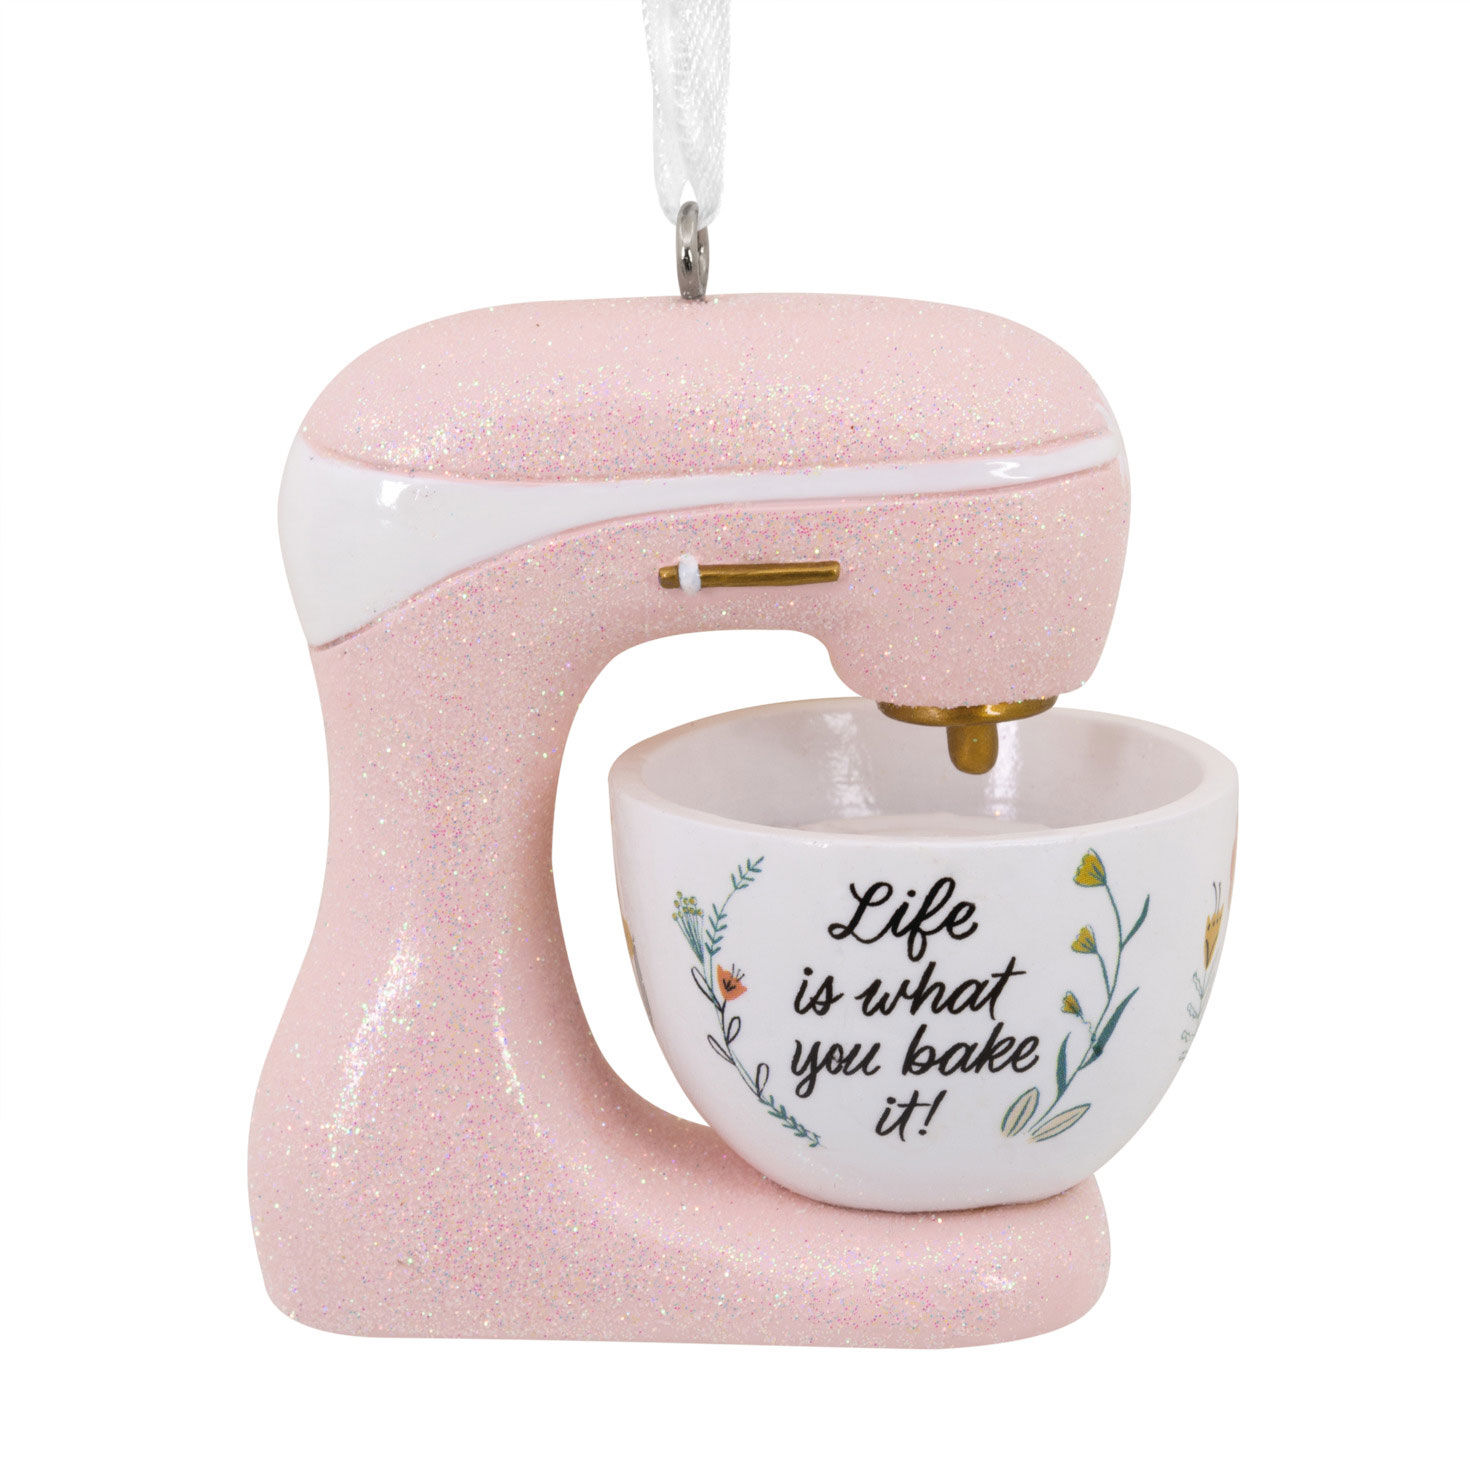 https://www.hallmark.com/dw/image/v2/AALB_PRD/on/demandware.static/-/Sites-hallmark-master/default/dwcbc8ed3c/images/finished-goods/products/1HGO2939/Life-Is-What-You-Bake-It-Pink-Stand-Mixer-Christmas-Ornament_1HGO2939_01.jpg?sfrm=jpg